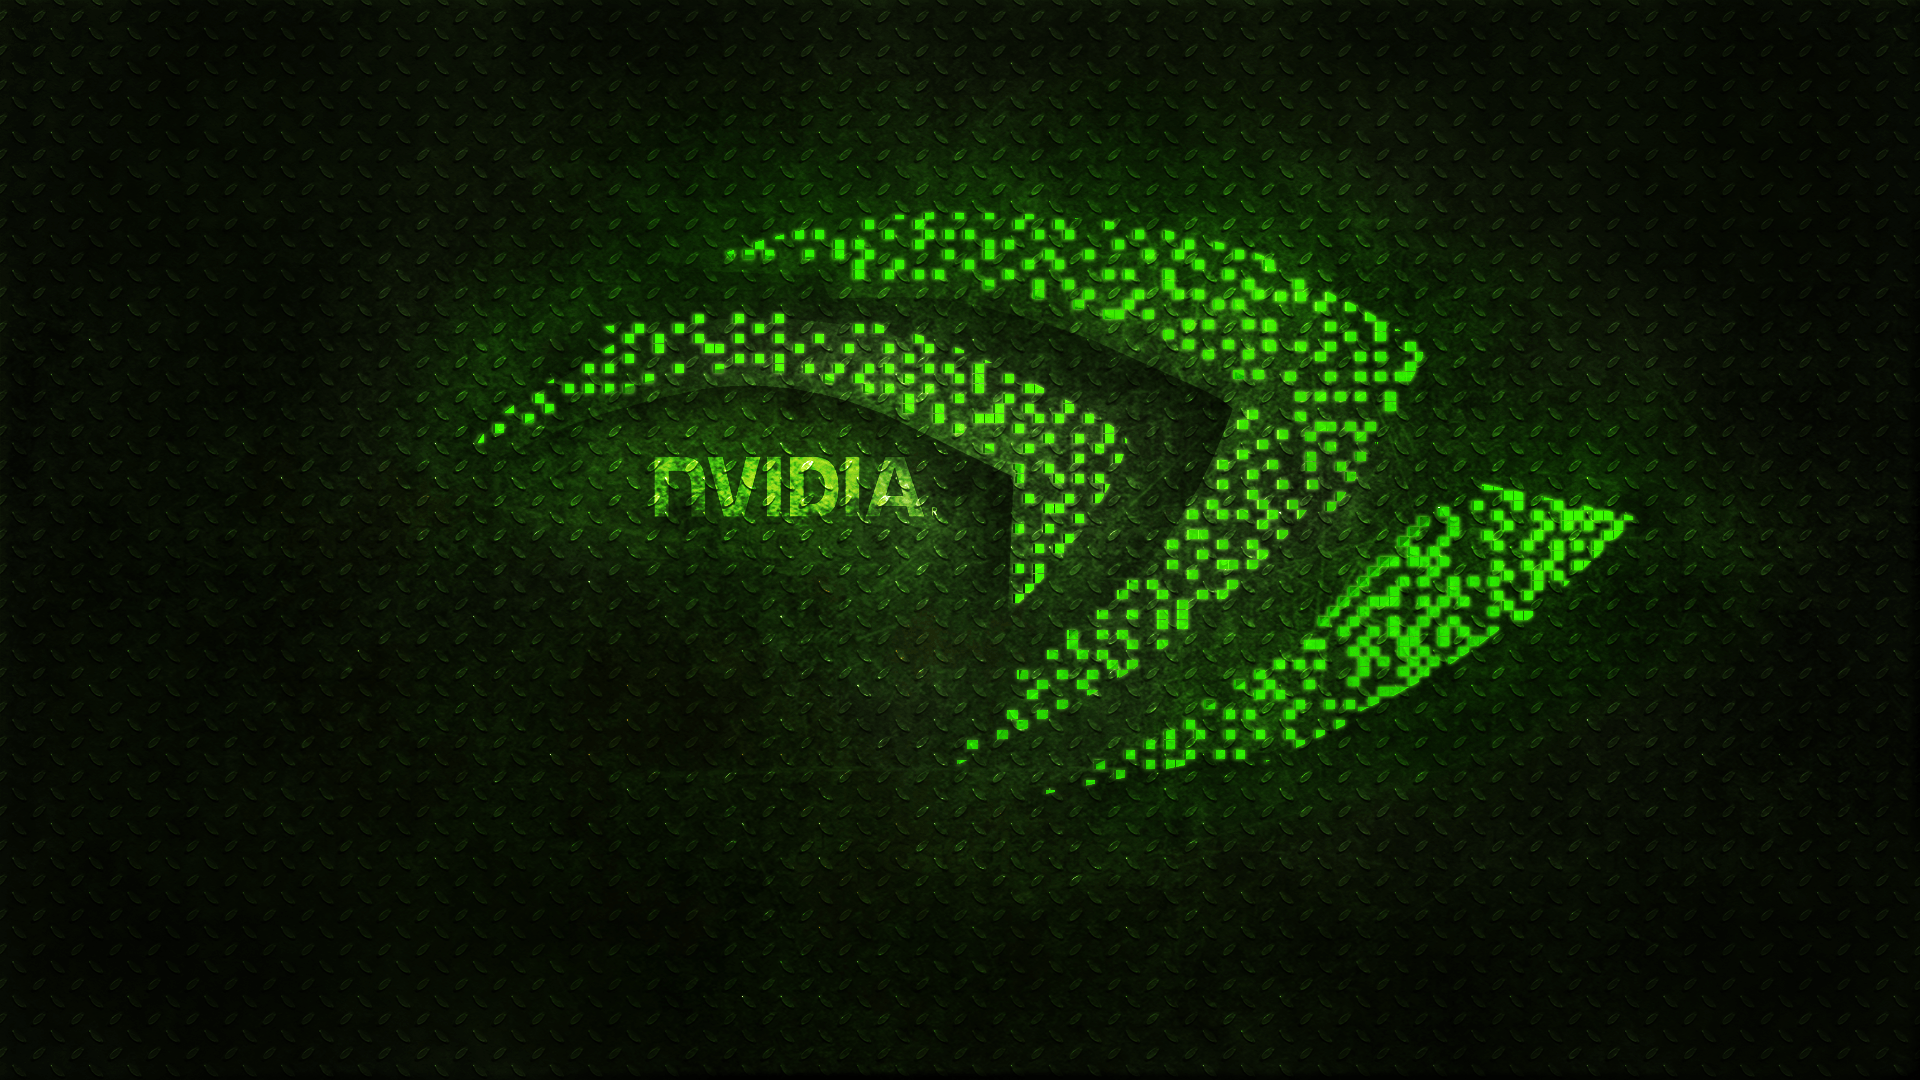 Wallpaper.wiki Picture Nvidia HD Free Download PIC WPE002188